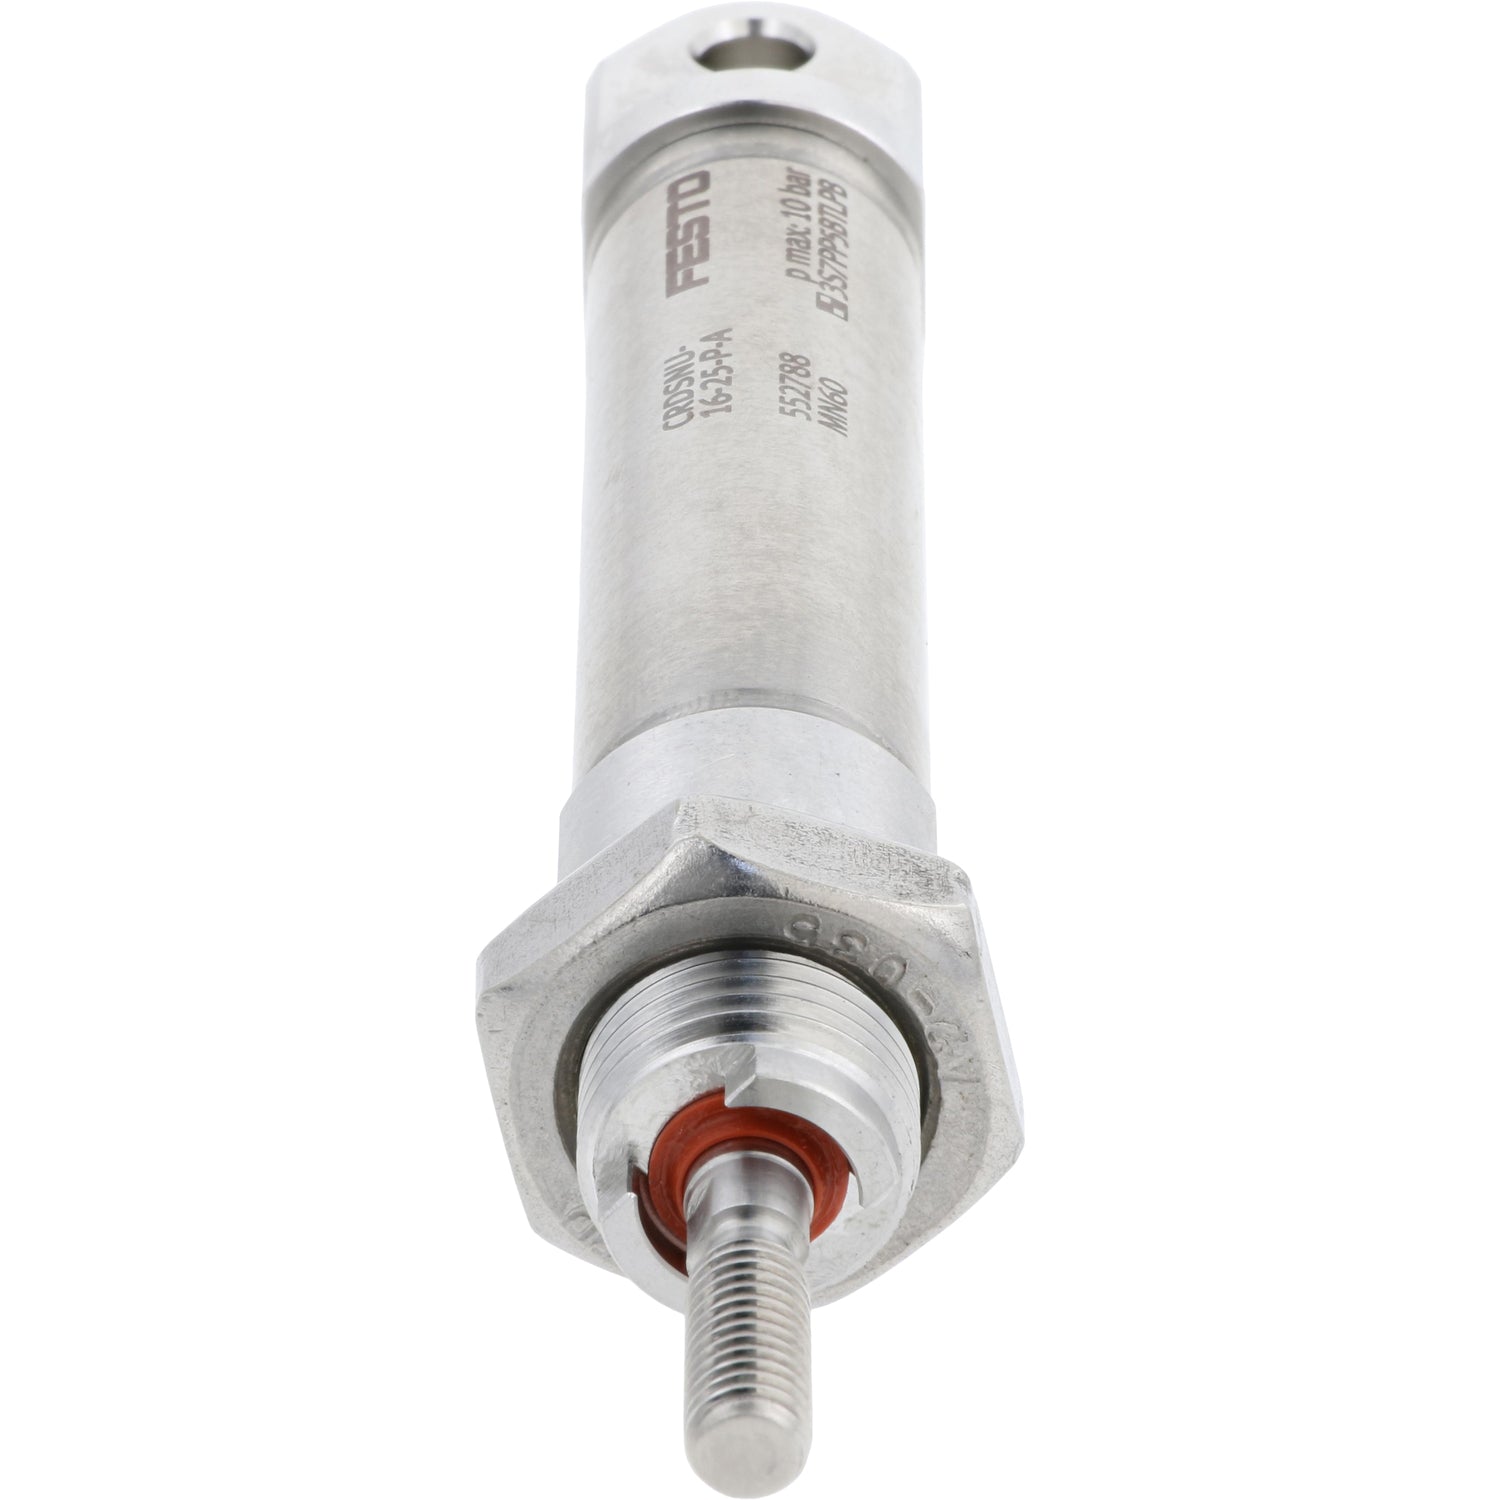 Stainless-steel , cylindrical pneumatic cylinder shown on white background. 552788